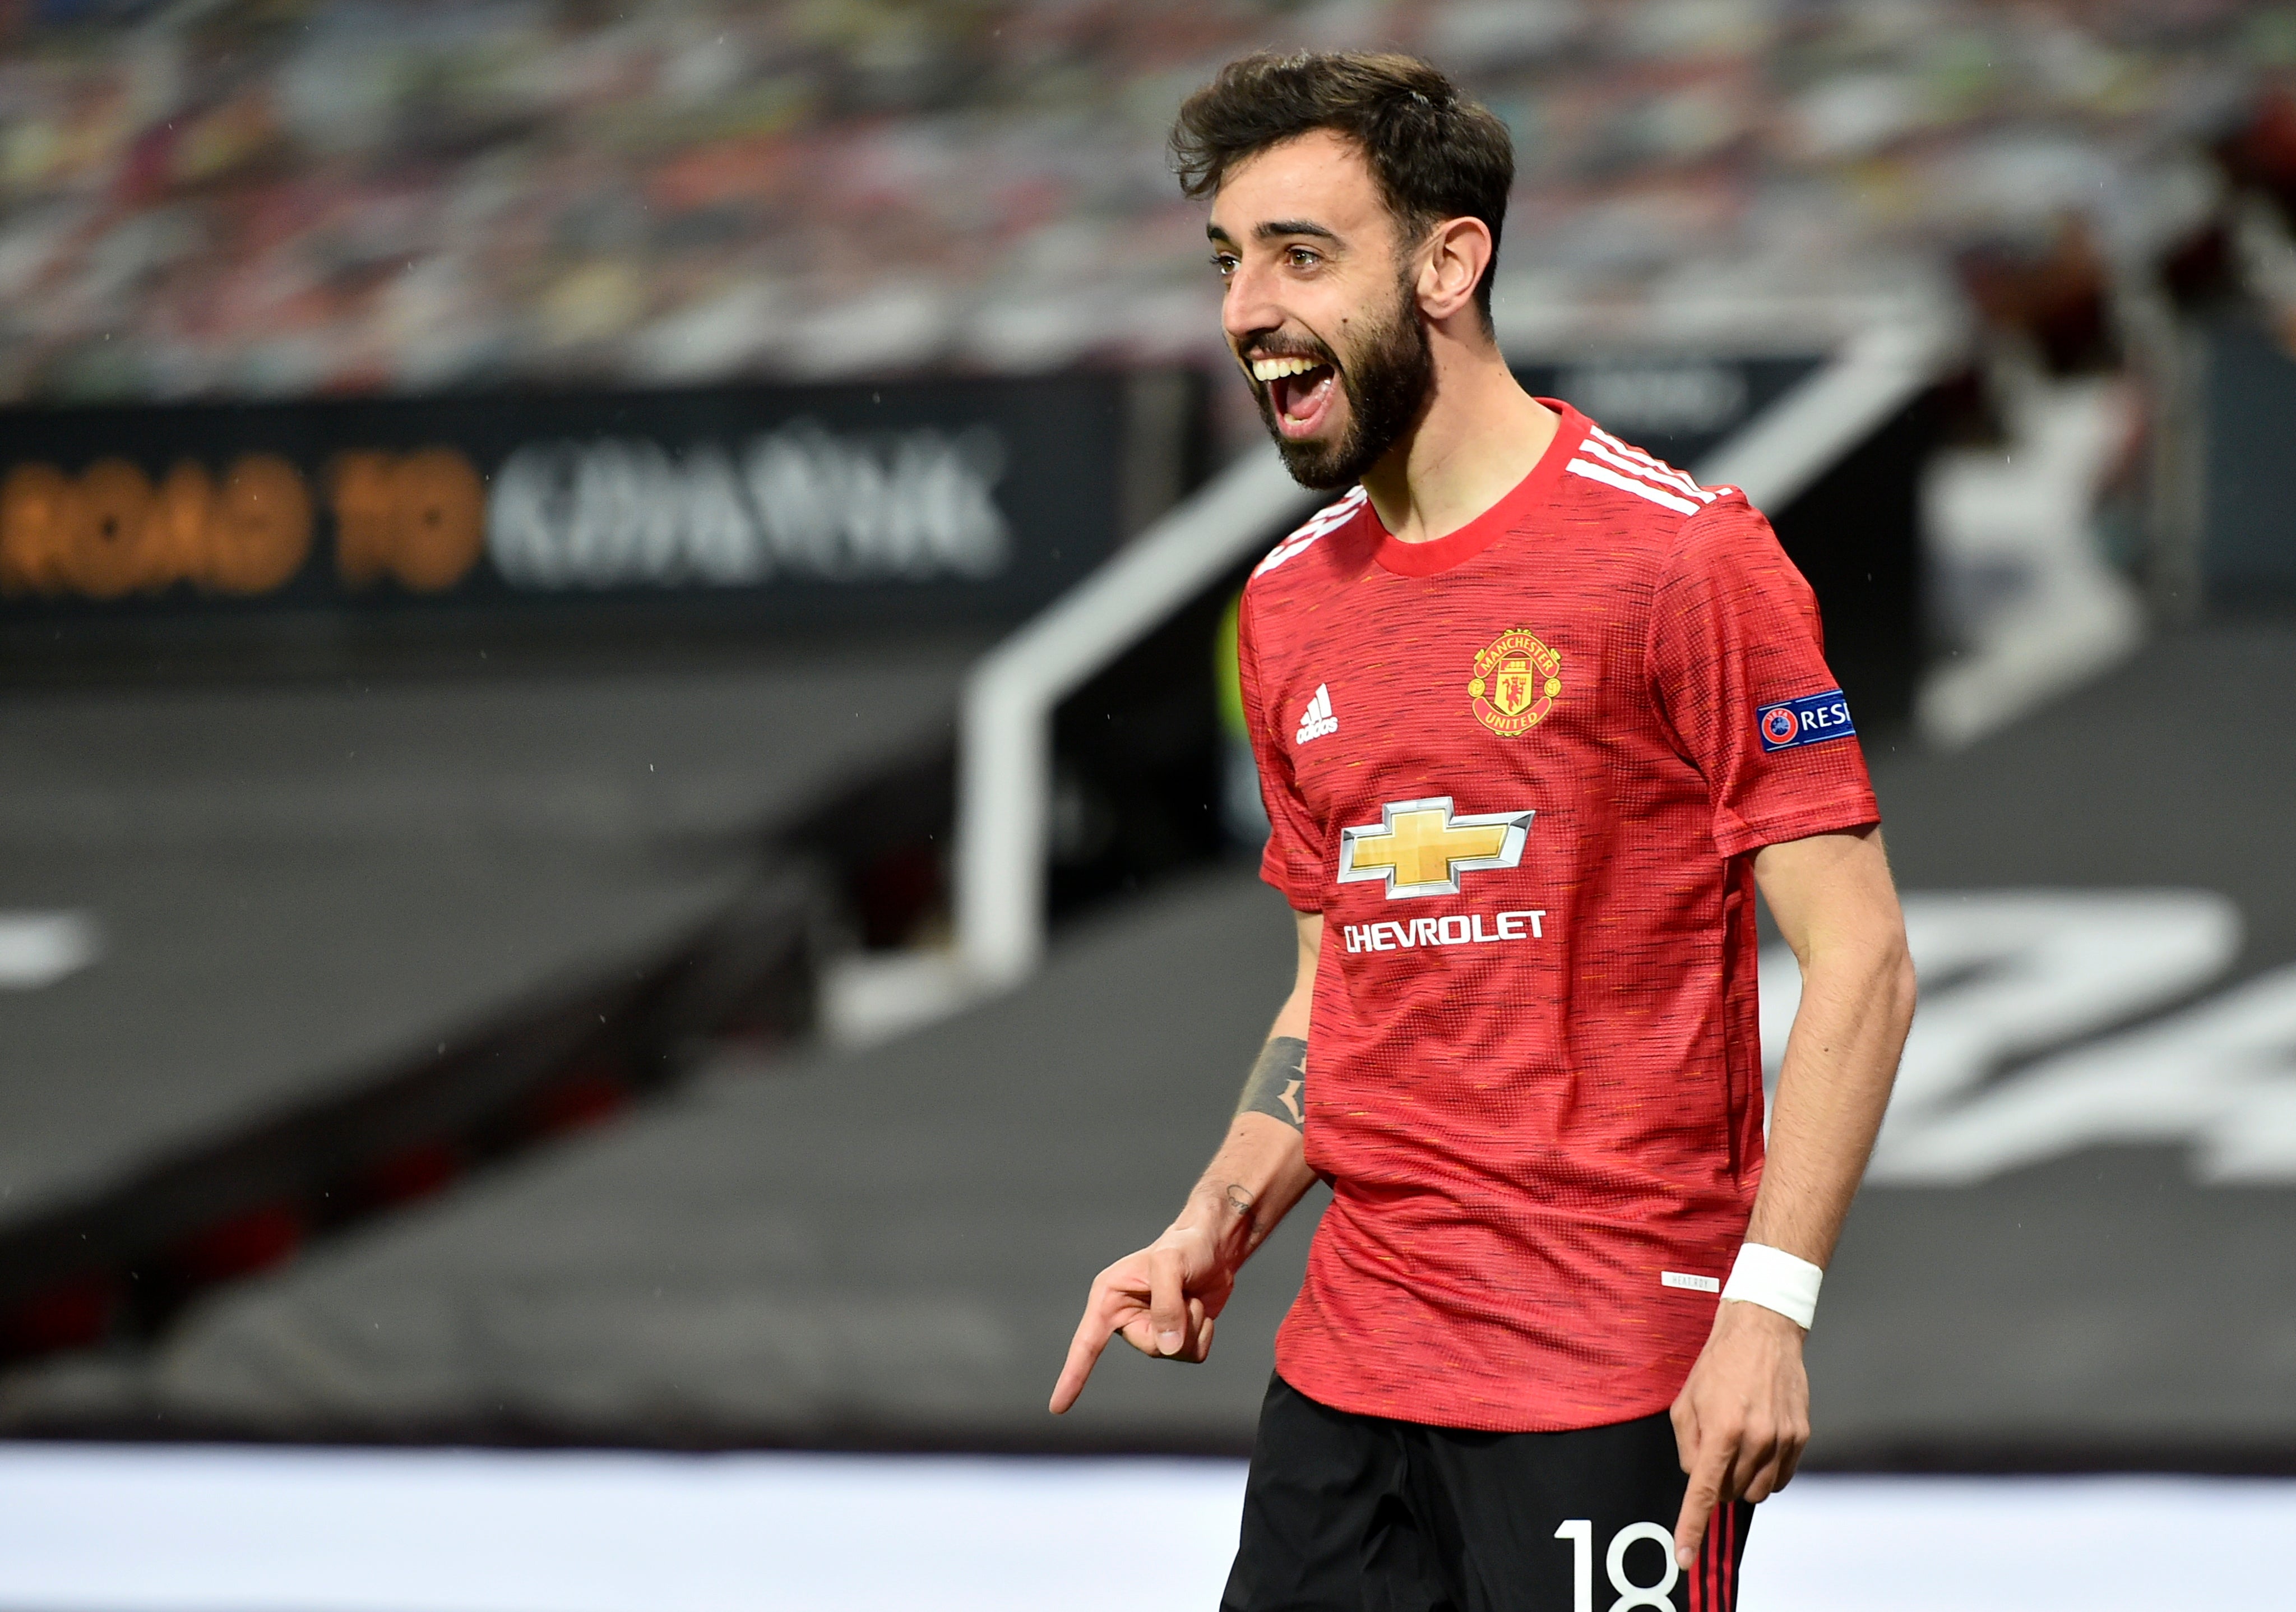 Bruno Fernandes has been in impressive form for United this season